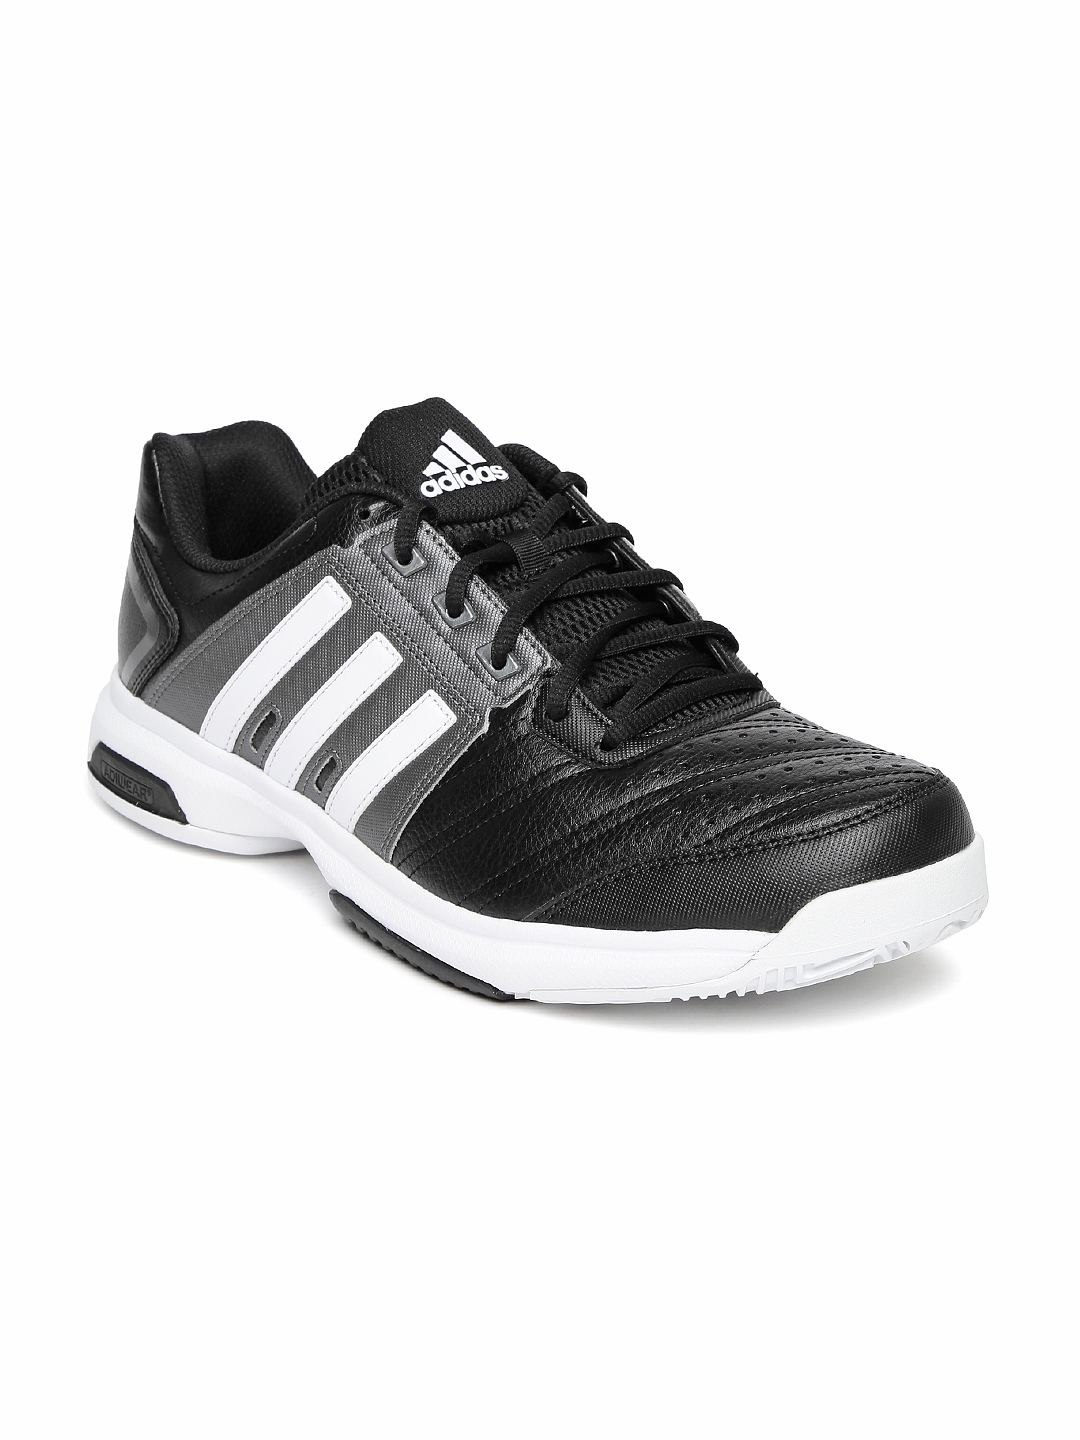 Buy ADIDAS Black Barricade Approach Tennis Shoes Shoes for Unisex 1461542 | Myntra